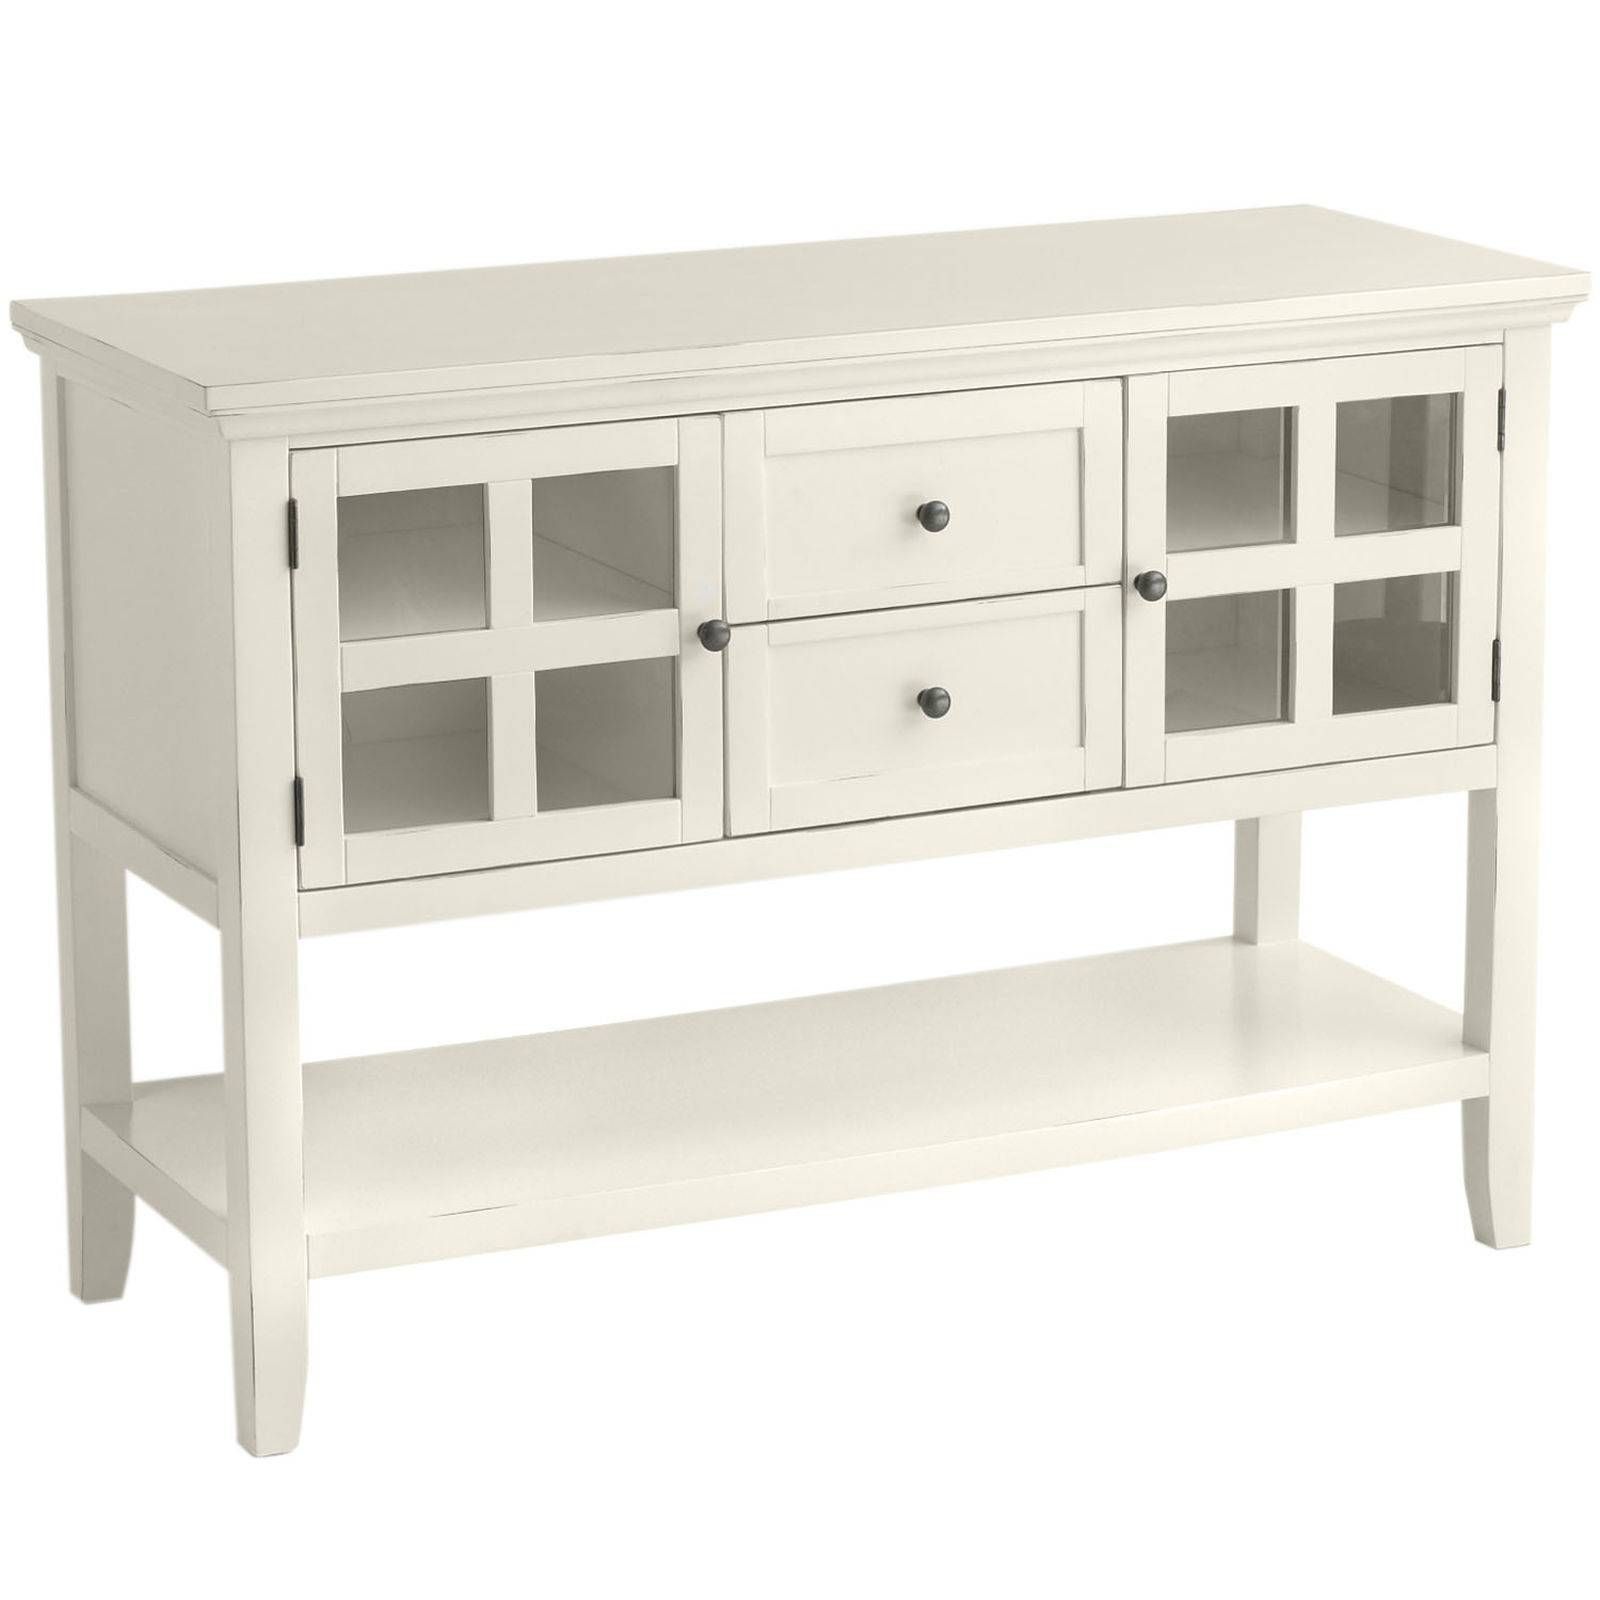 Sideboards. Inspiring Narrow Buffet Table: Narrow Buffet Table For Kitchen Sideboards White (Photo 17 of 20)